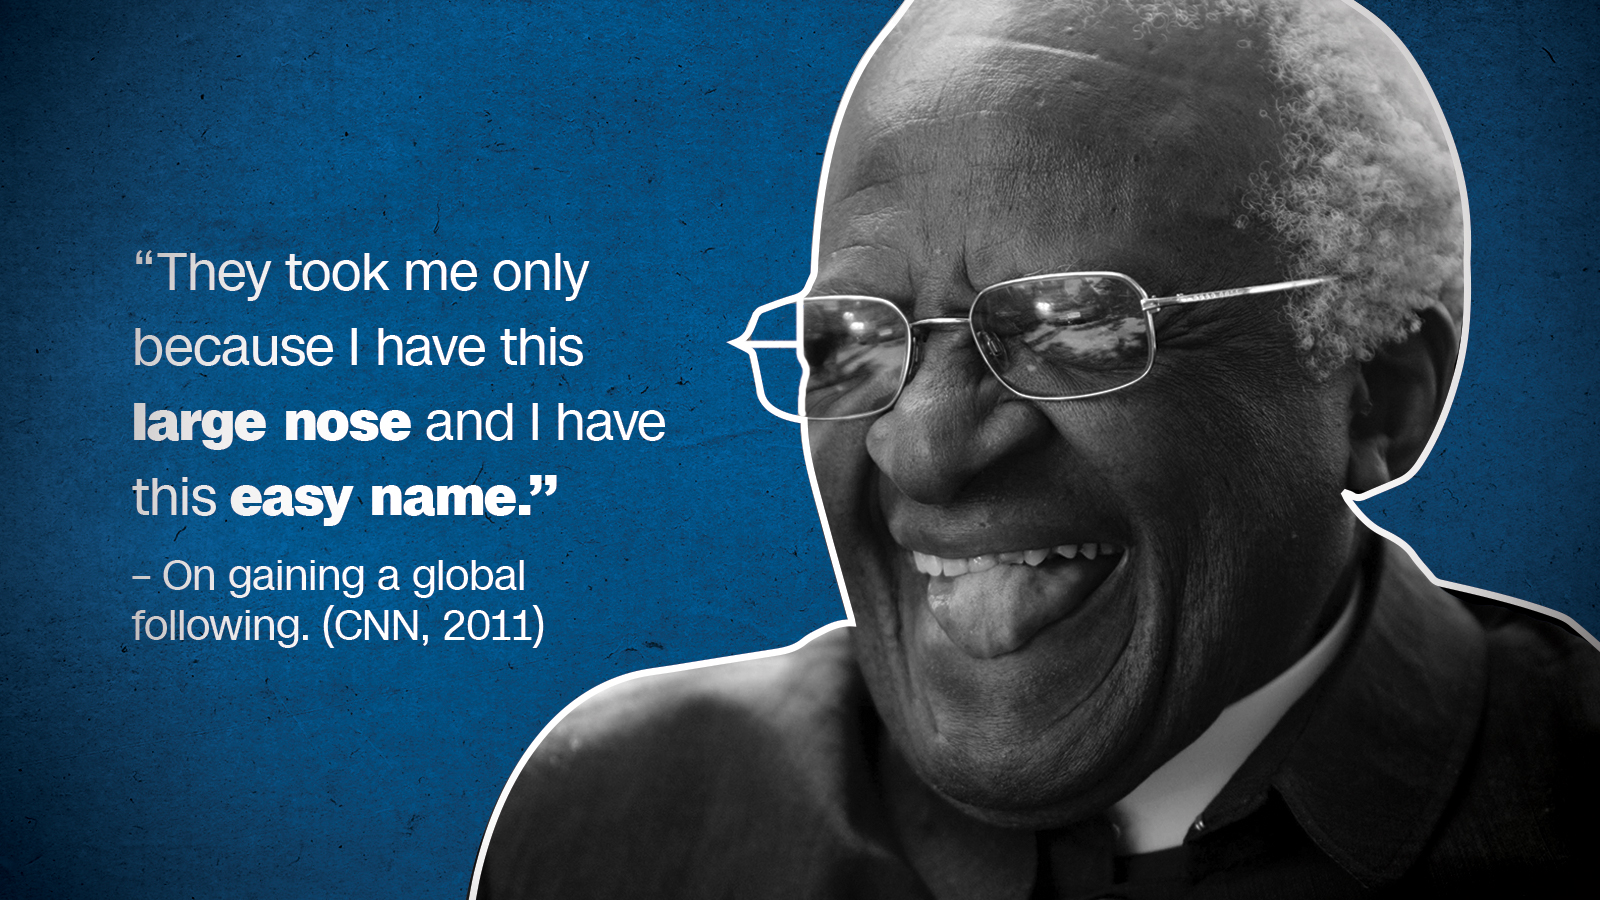 Desmond Tutu: 'The Arch', in his own words